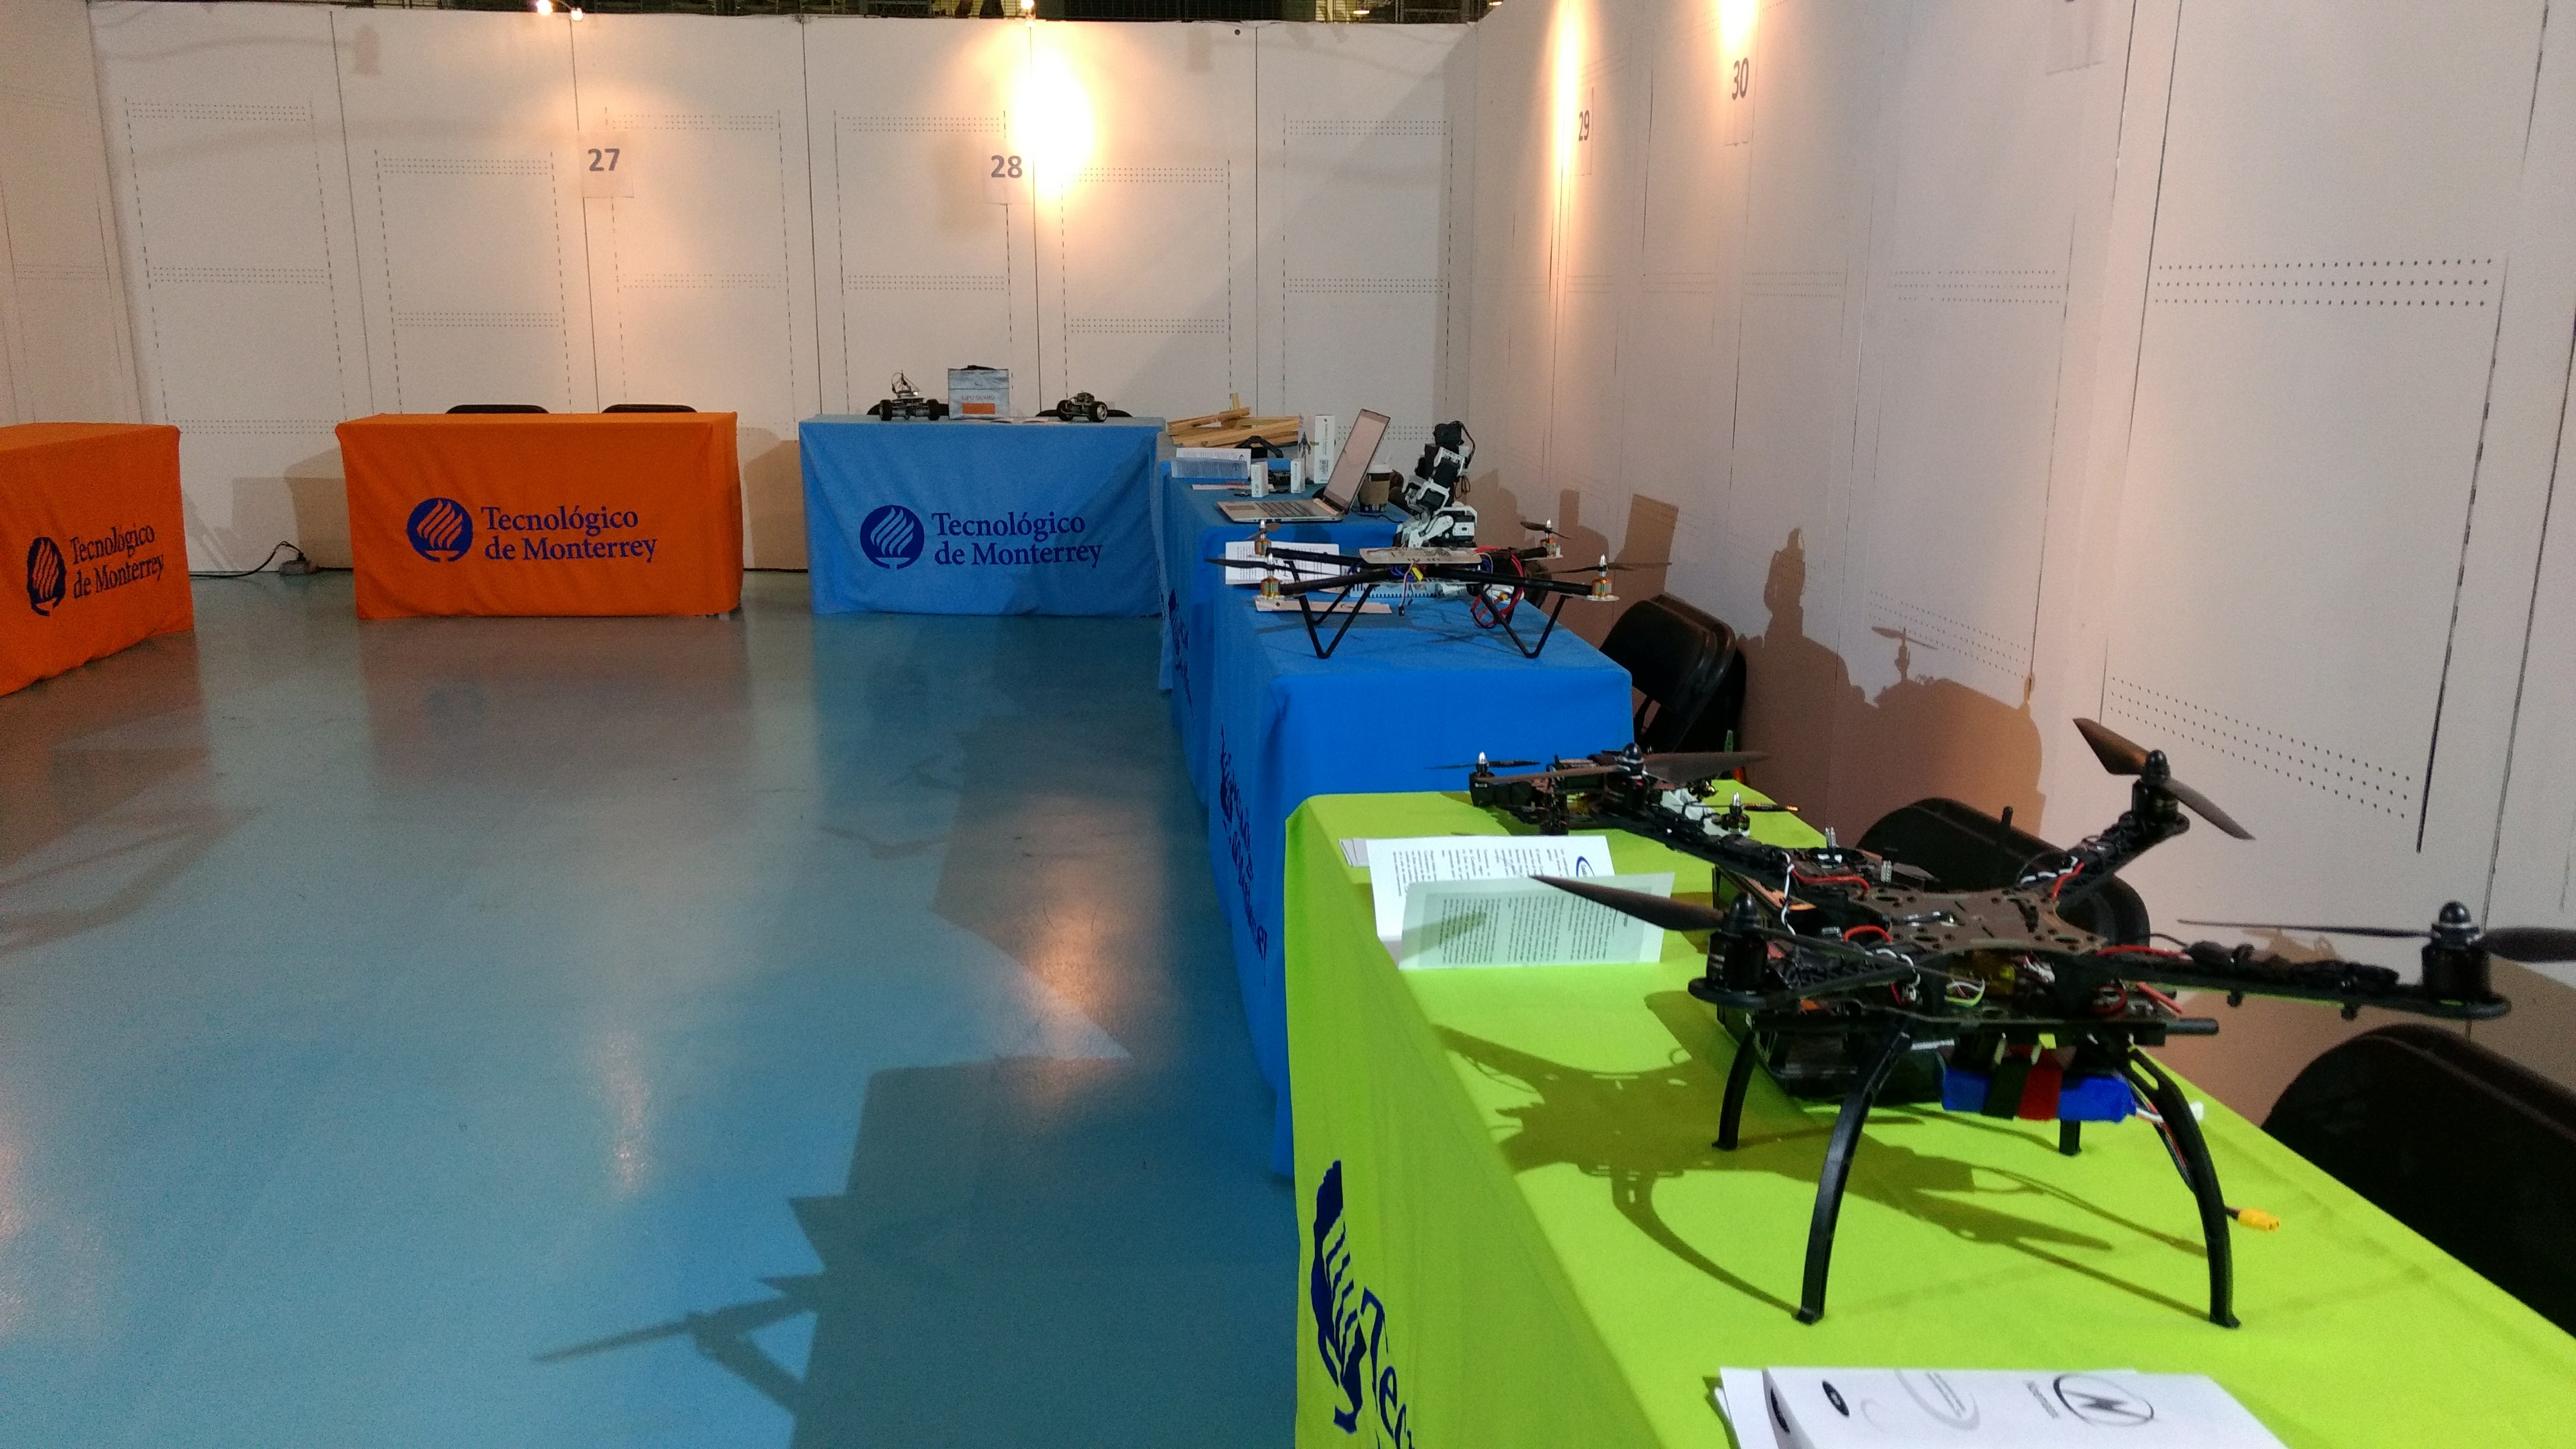 Drones on tables